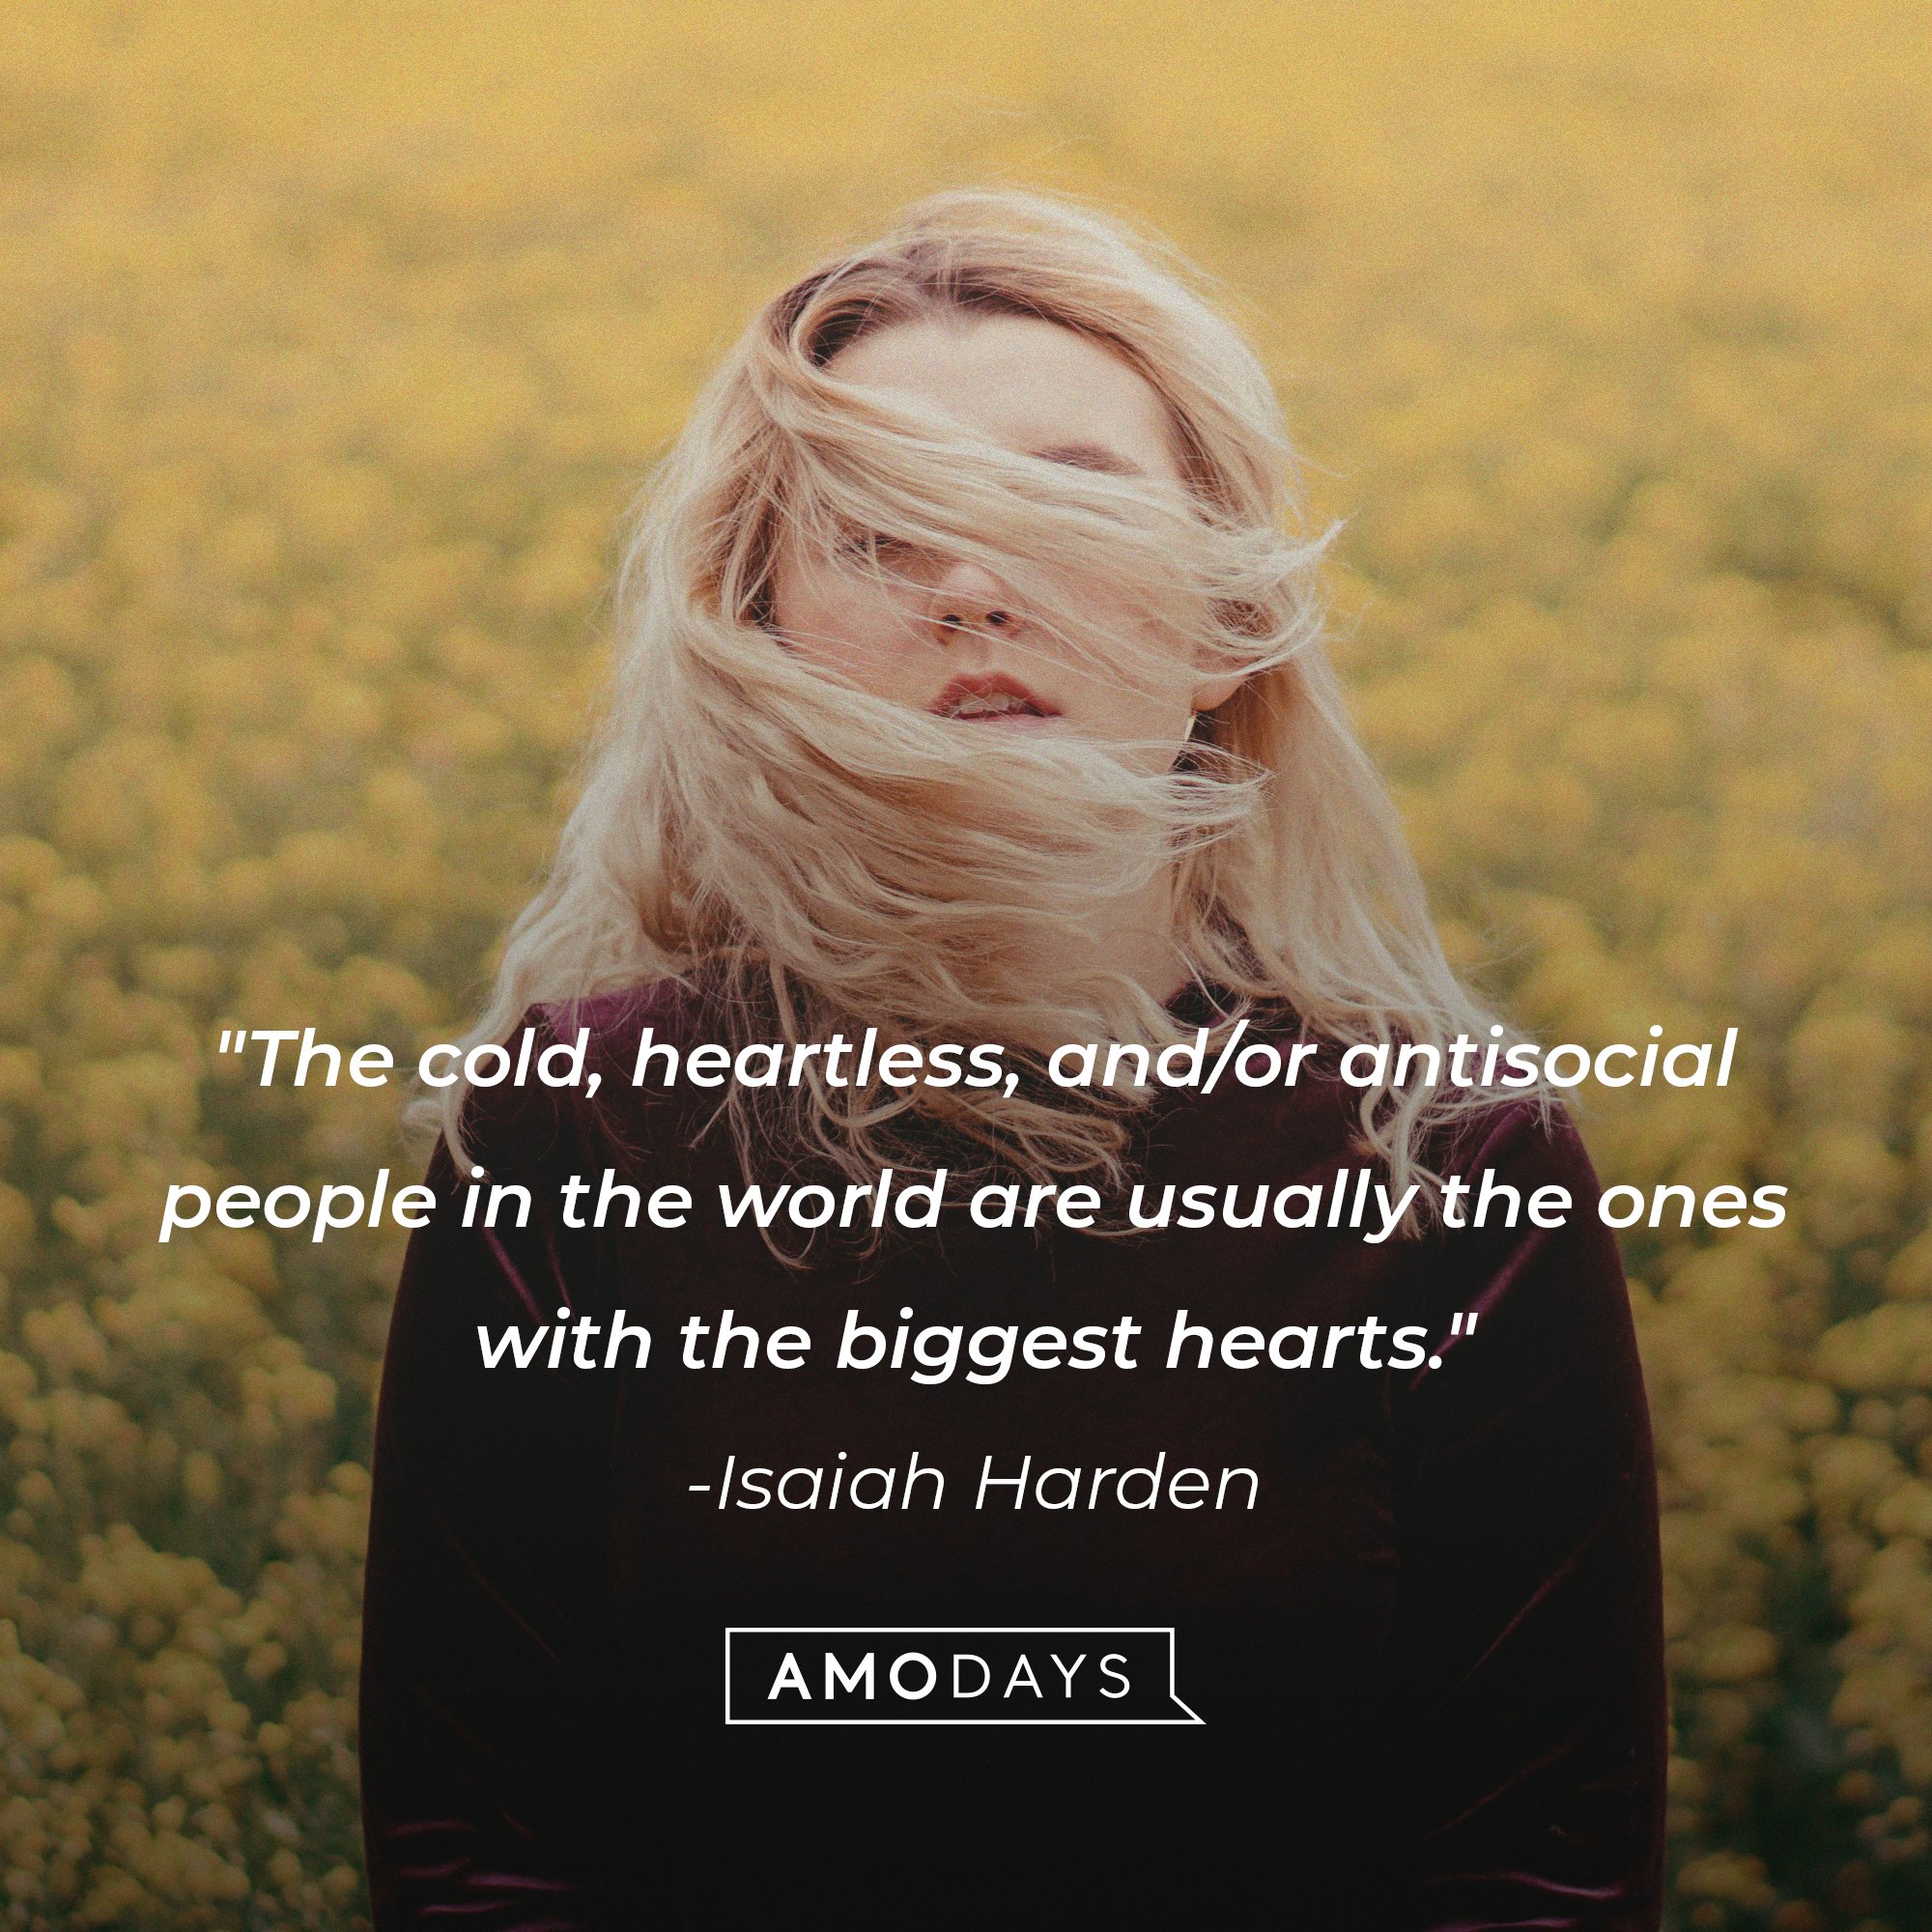 Isaiah Harden's quote: "The cold, heartless, and/or antisocial people in the world are usually the ones with the biggest hearts." | Image: AmoDays